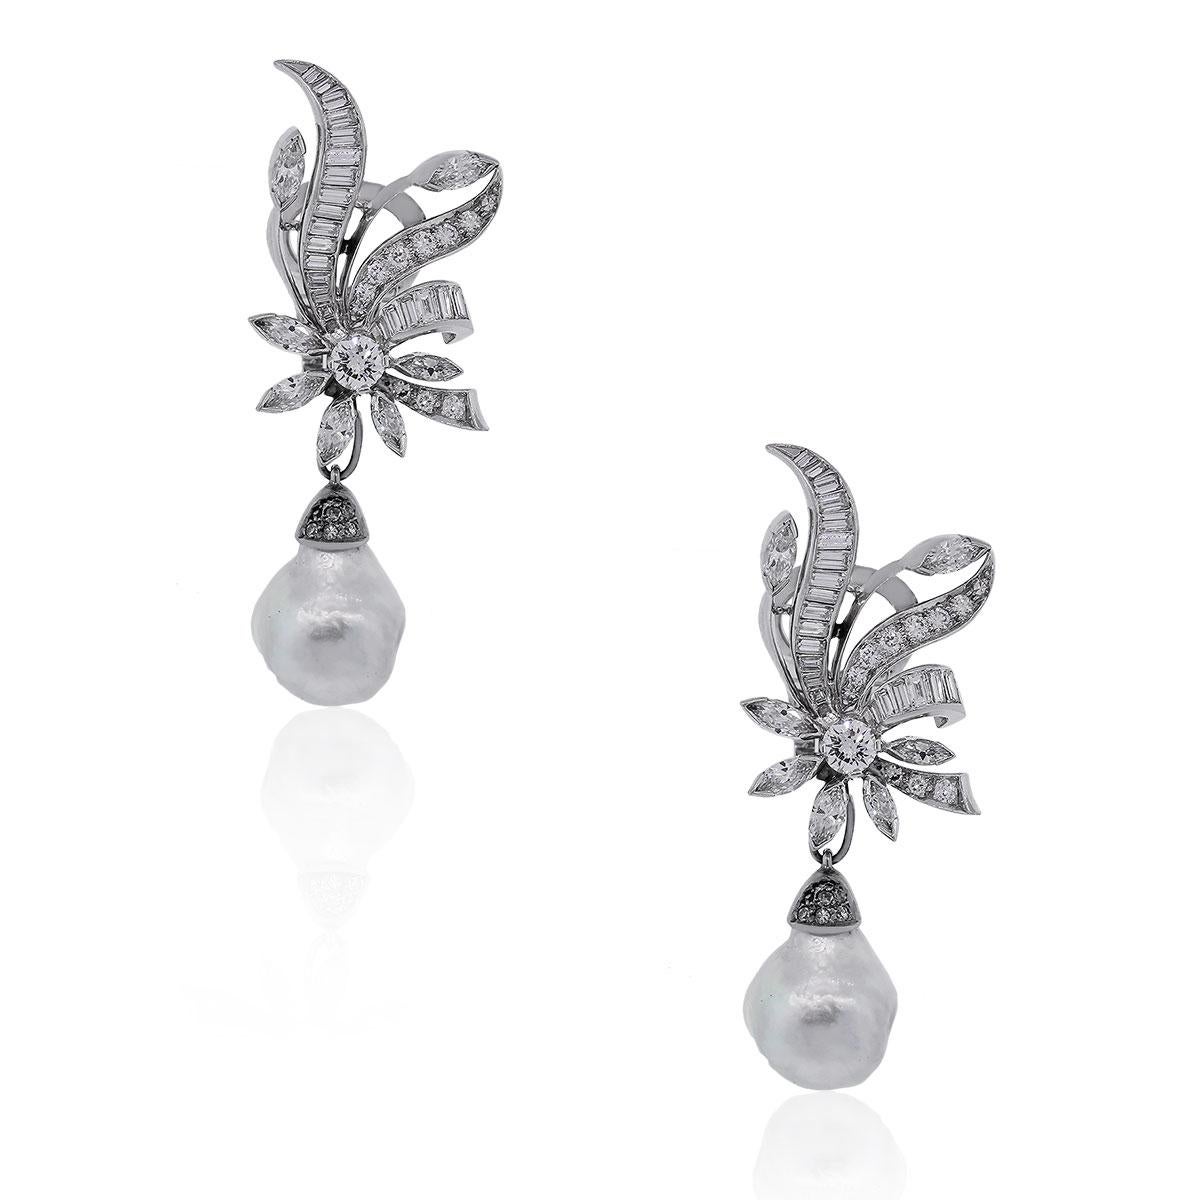 Material: Platinum
Diamond Details: Approximately 4.0ctw Marquise, Baguette and Round Brilliant Diamonds. Diamonds are approximately G/H in color and VS in clarity 
Pearl Details: Pearls measuring approximately 12.44mm x 13.80mm
Earring